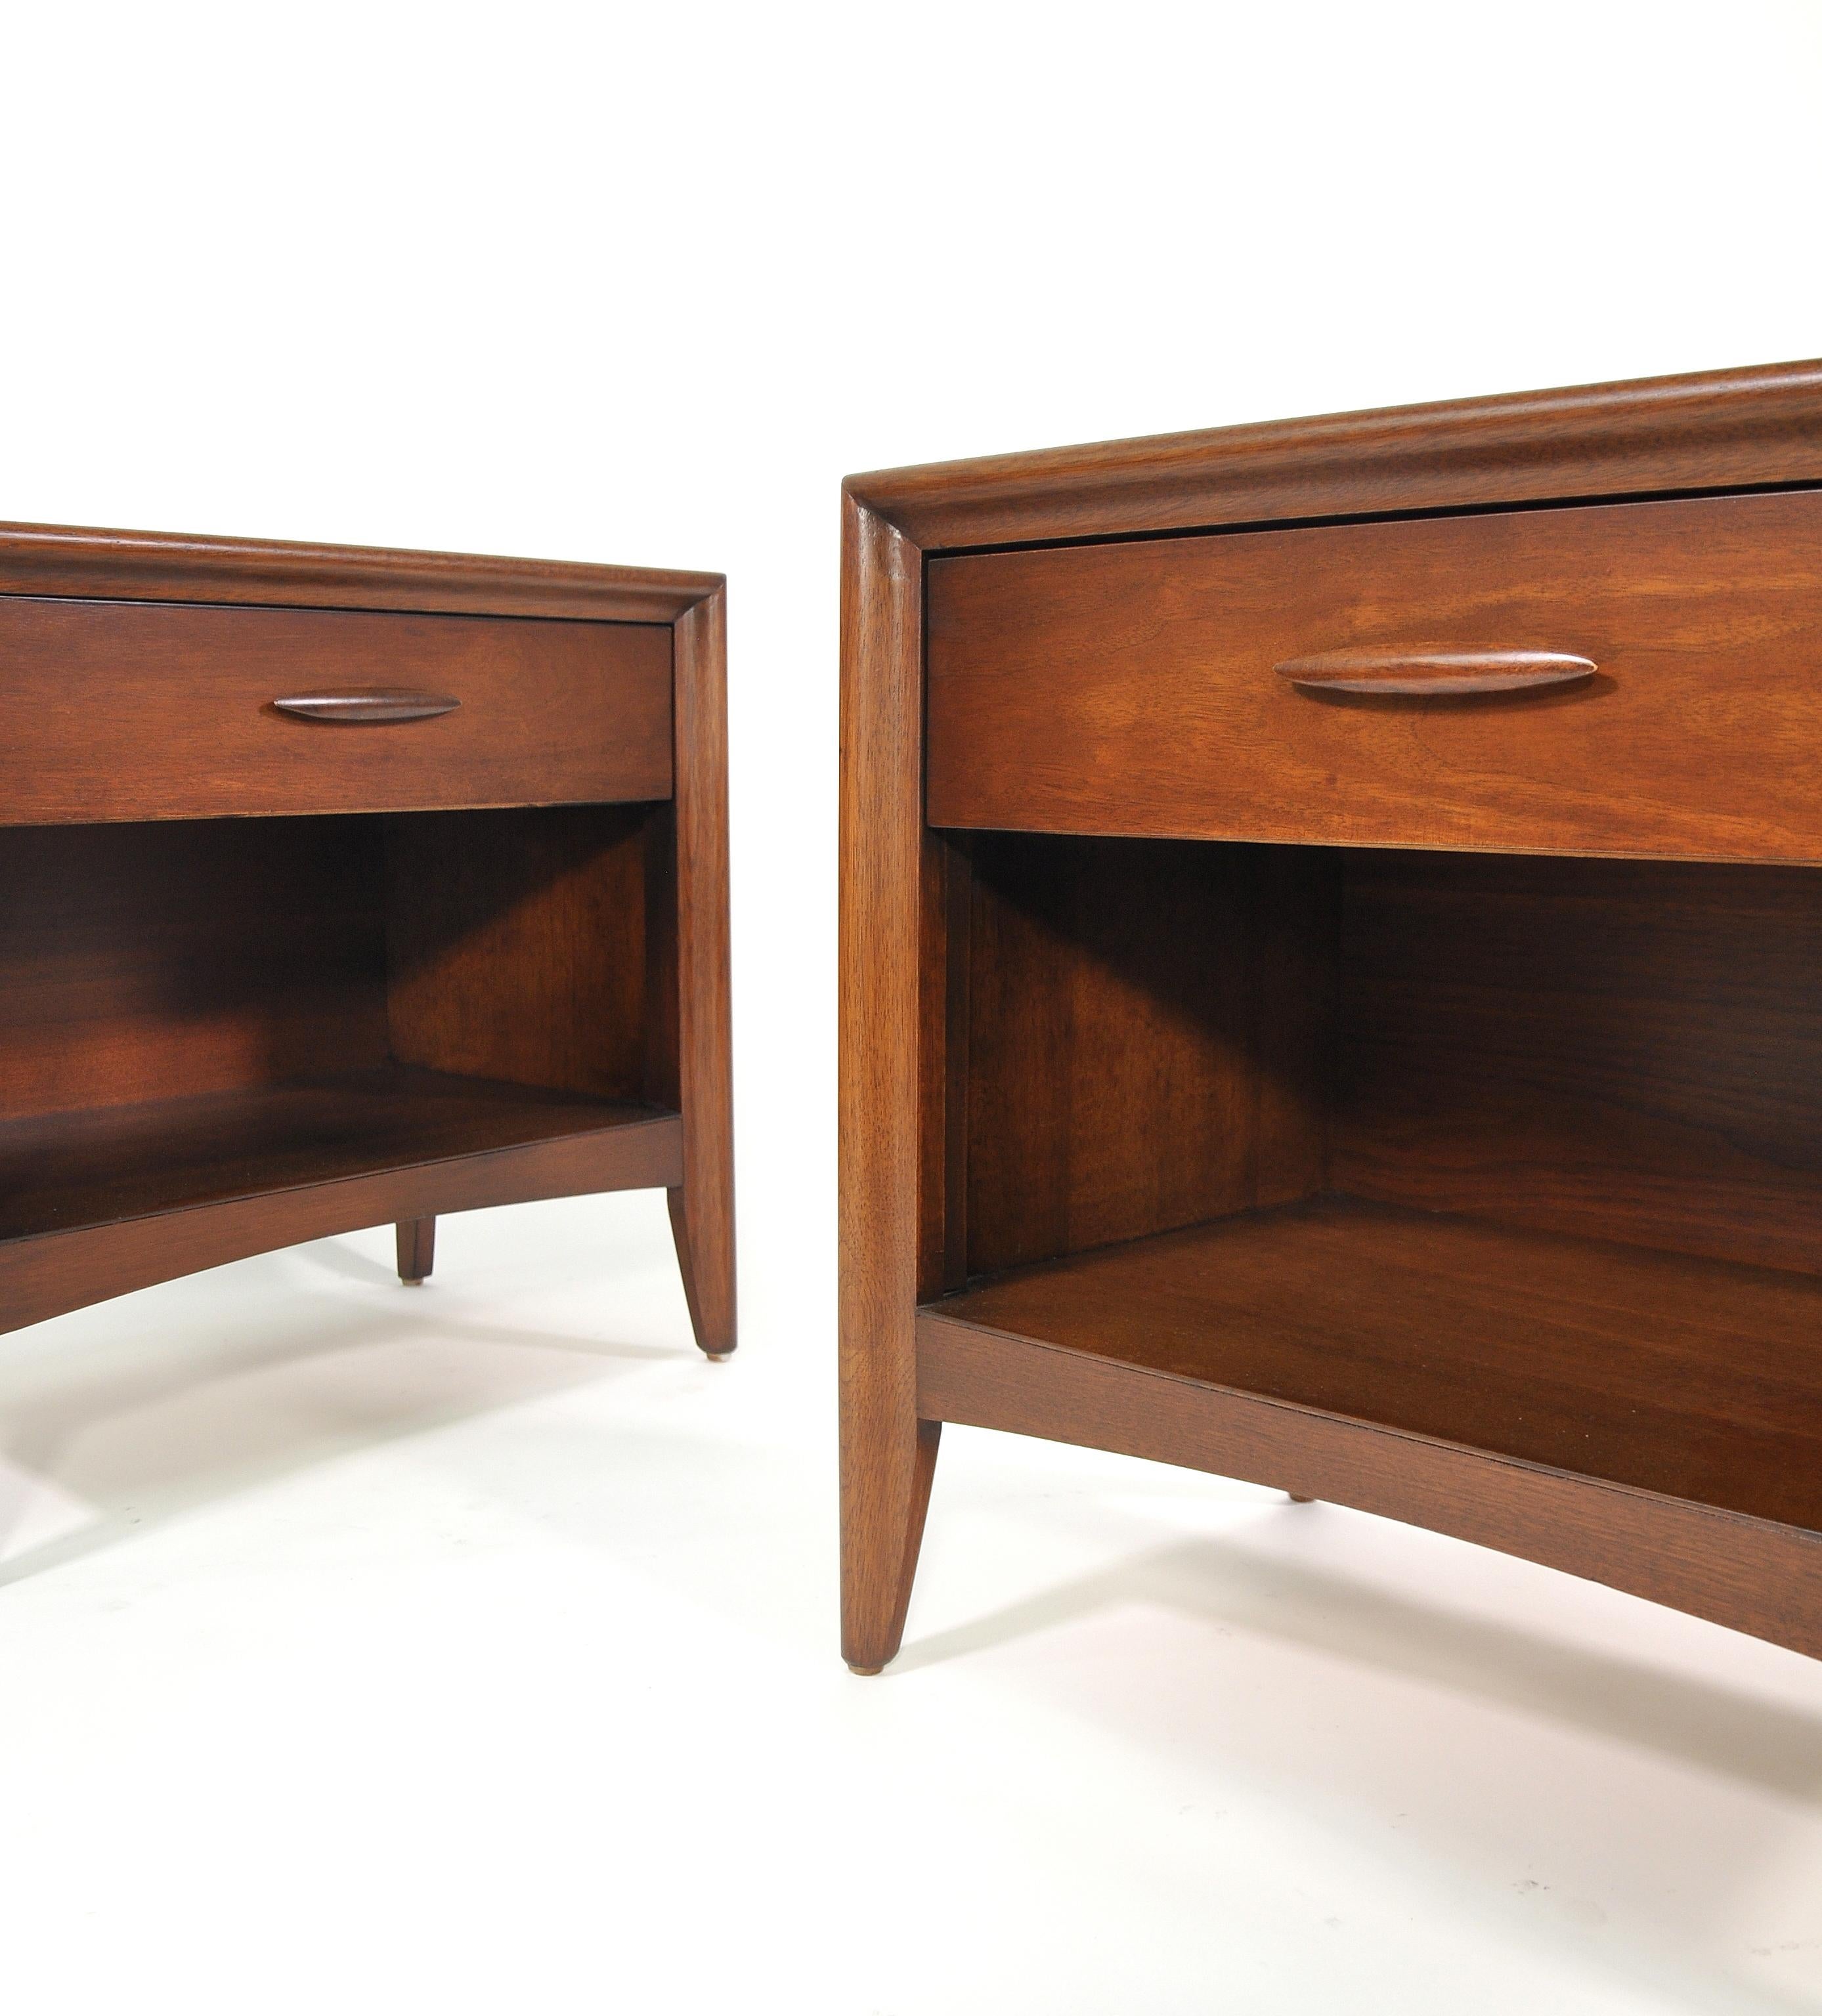 Pair of vintage Mid-Century Modern walnut end or bedside tables from the Emphasis line manufactured by Broyhill in the 1960s. Each two-tiered occasional table is fitted with a drawer and a shelf. The drawer fronts of the nightstands have the